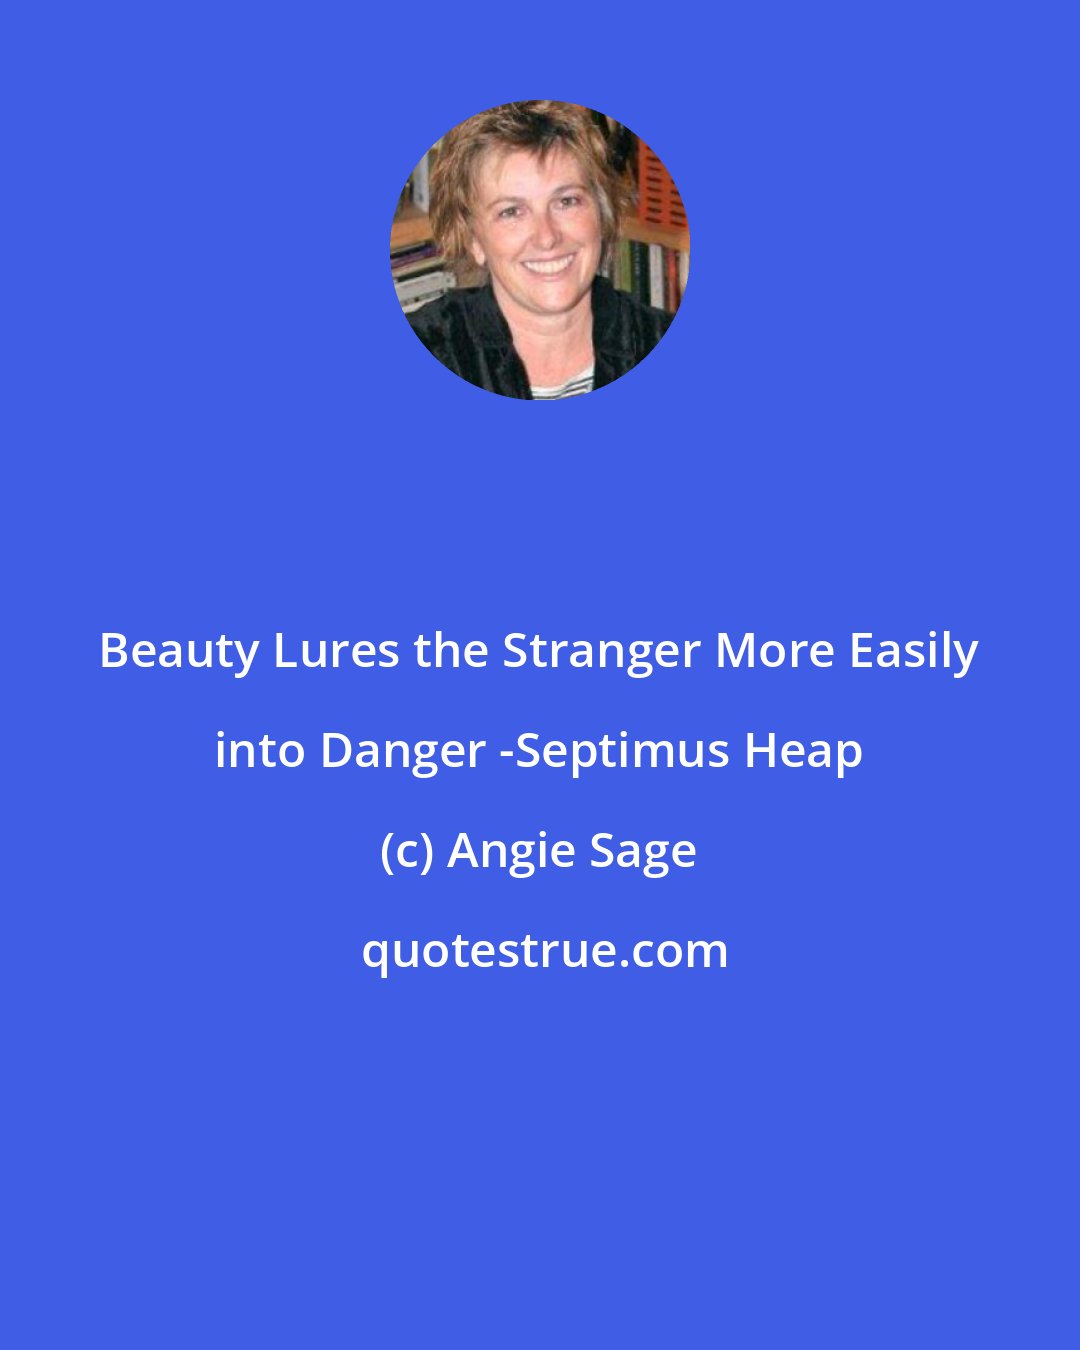 Angie Sage: Beauty Lures the Stranger More Easily into Danger -Septimus Heap